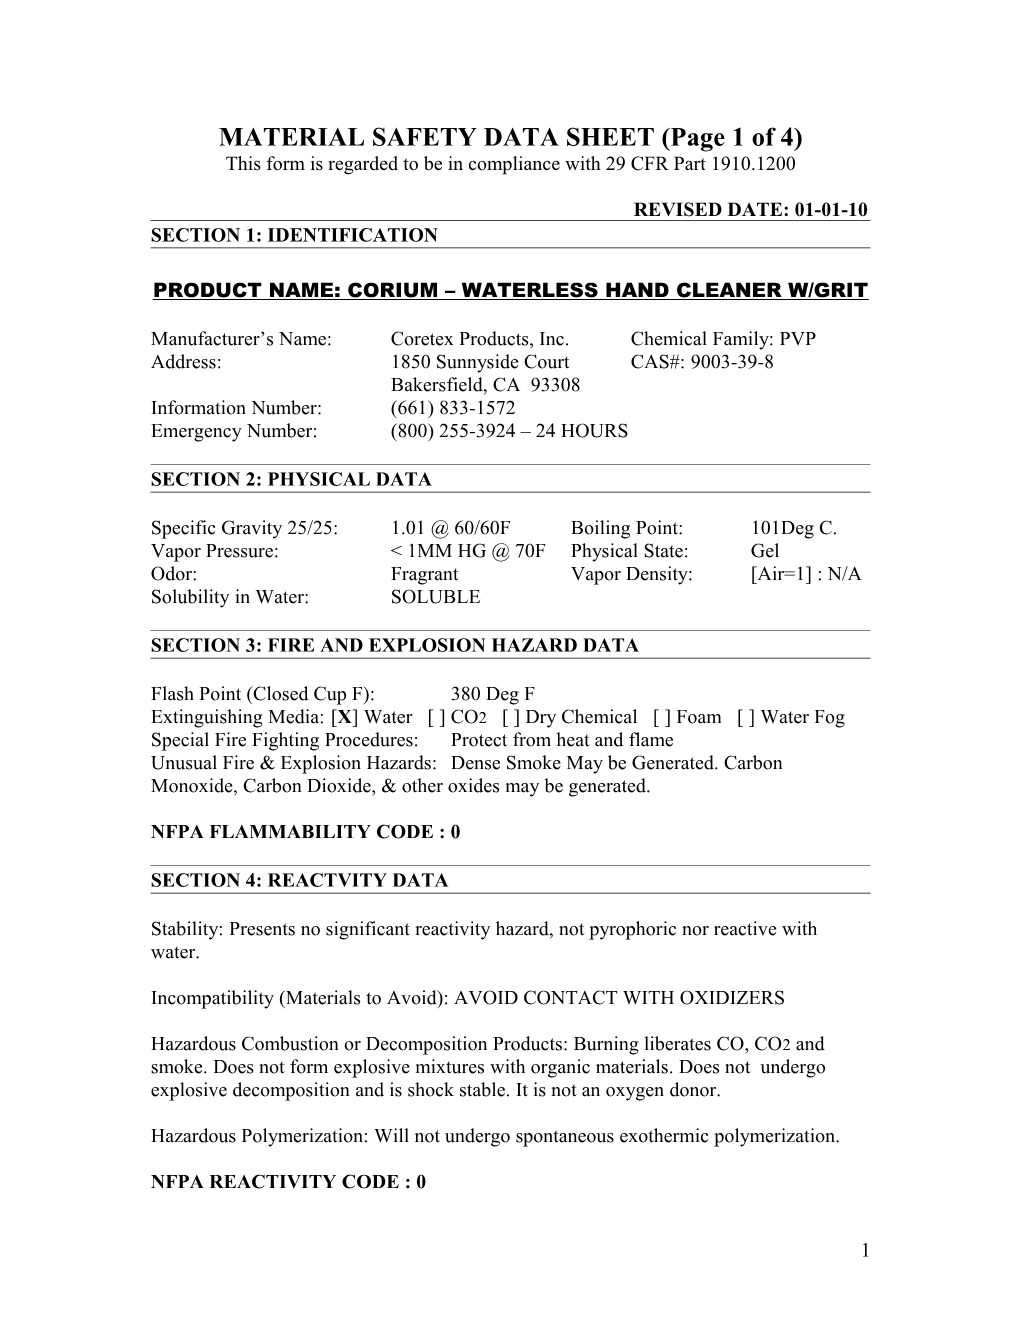 MATERIAL SAFETY DATA SHEET (Page 1 of 3) s1